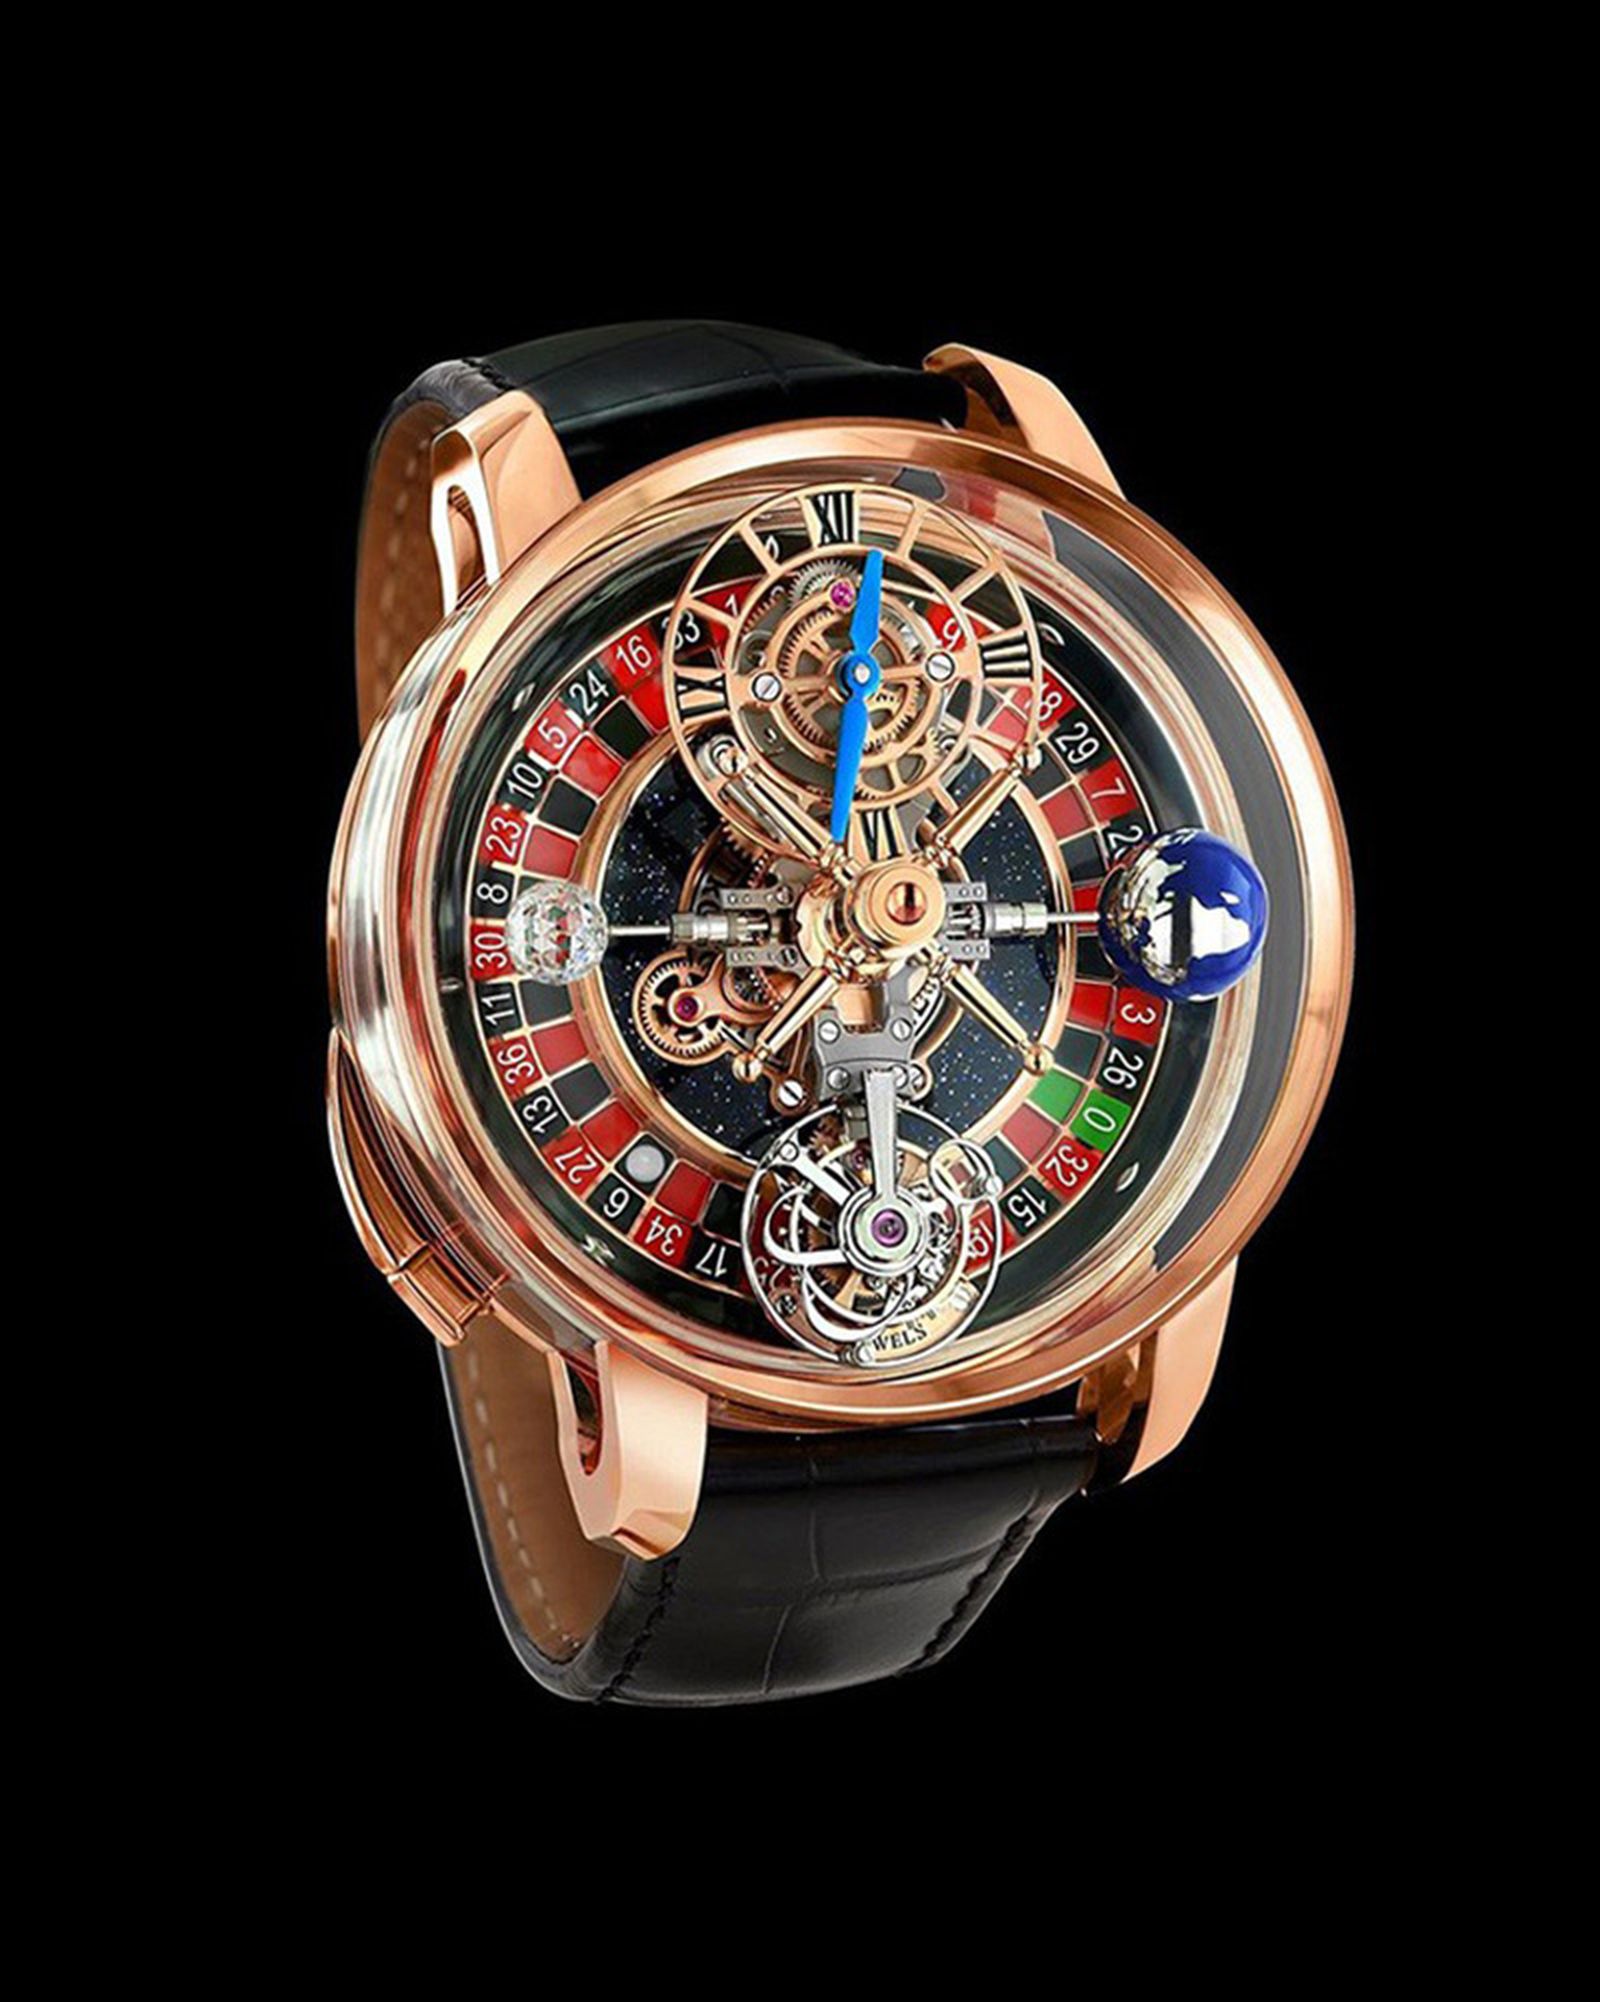 Jacob & Co. Astronomia Casino watch, with working roulette wheel.  $620,000.